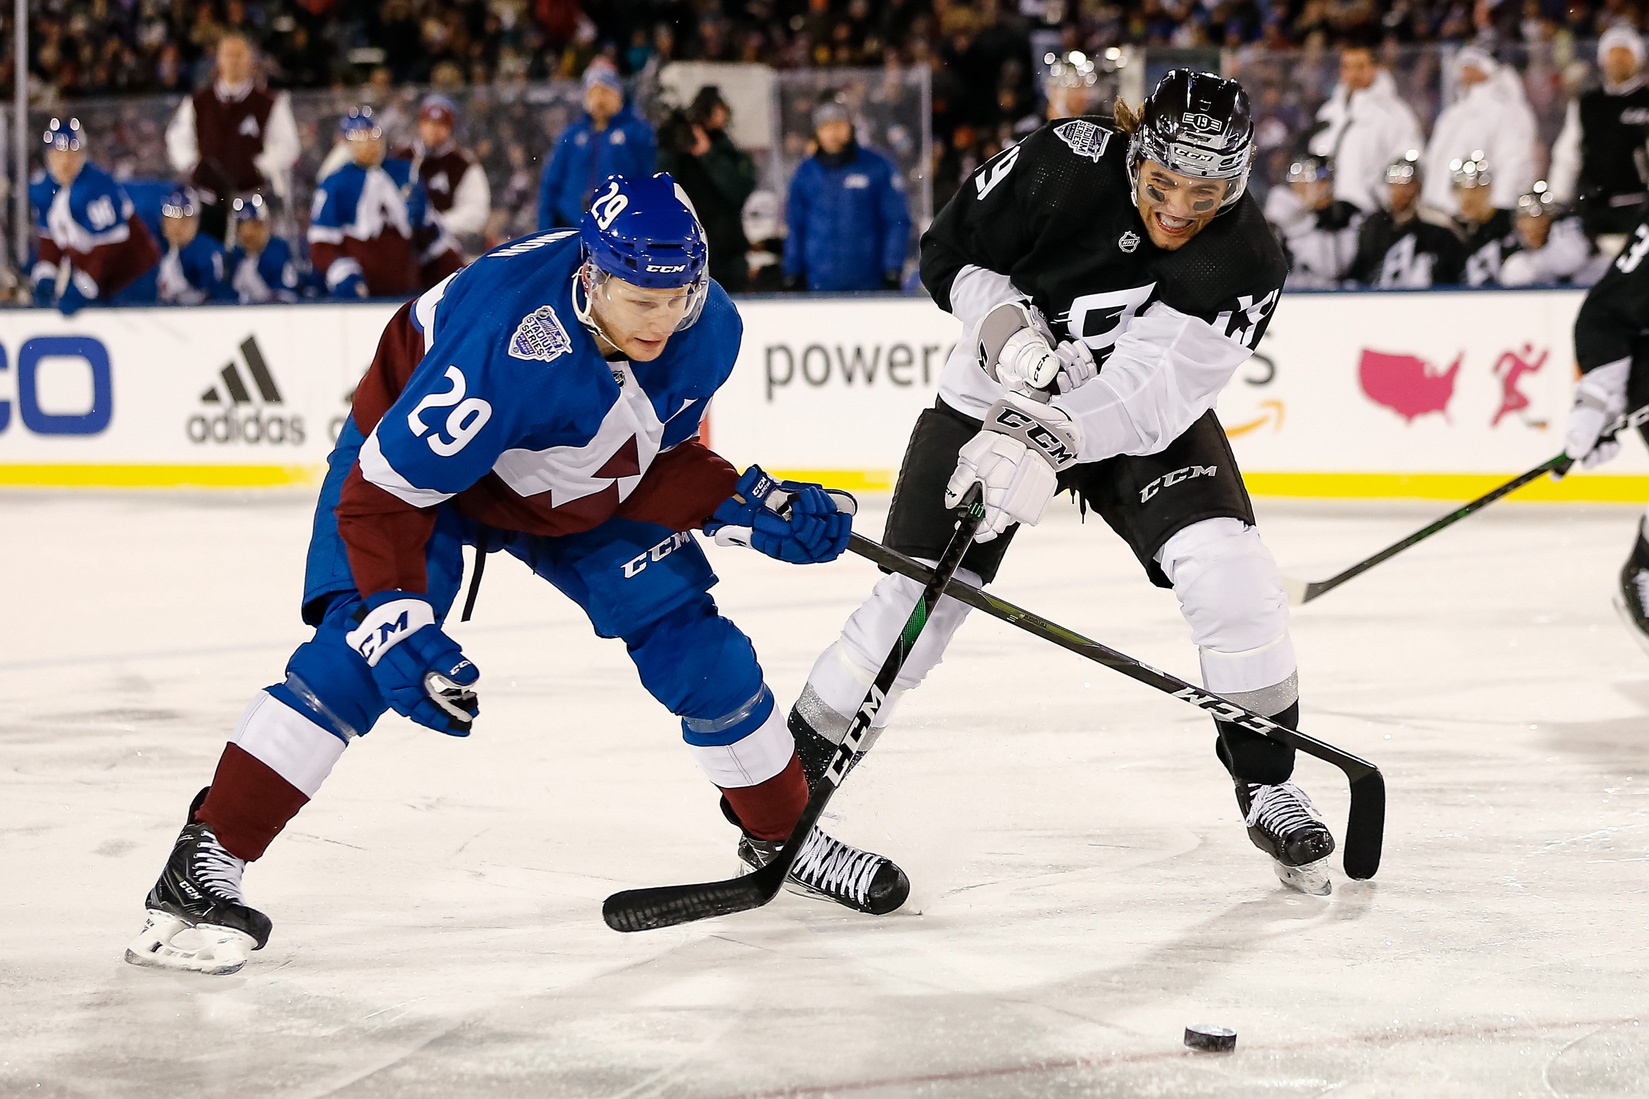 Toffoli's hat trick leads Kings over Avalanche in Stadium Series